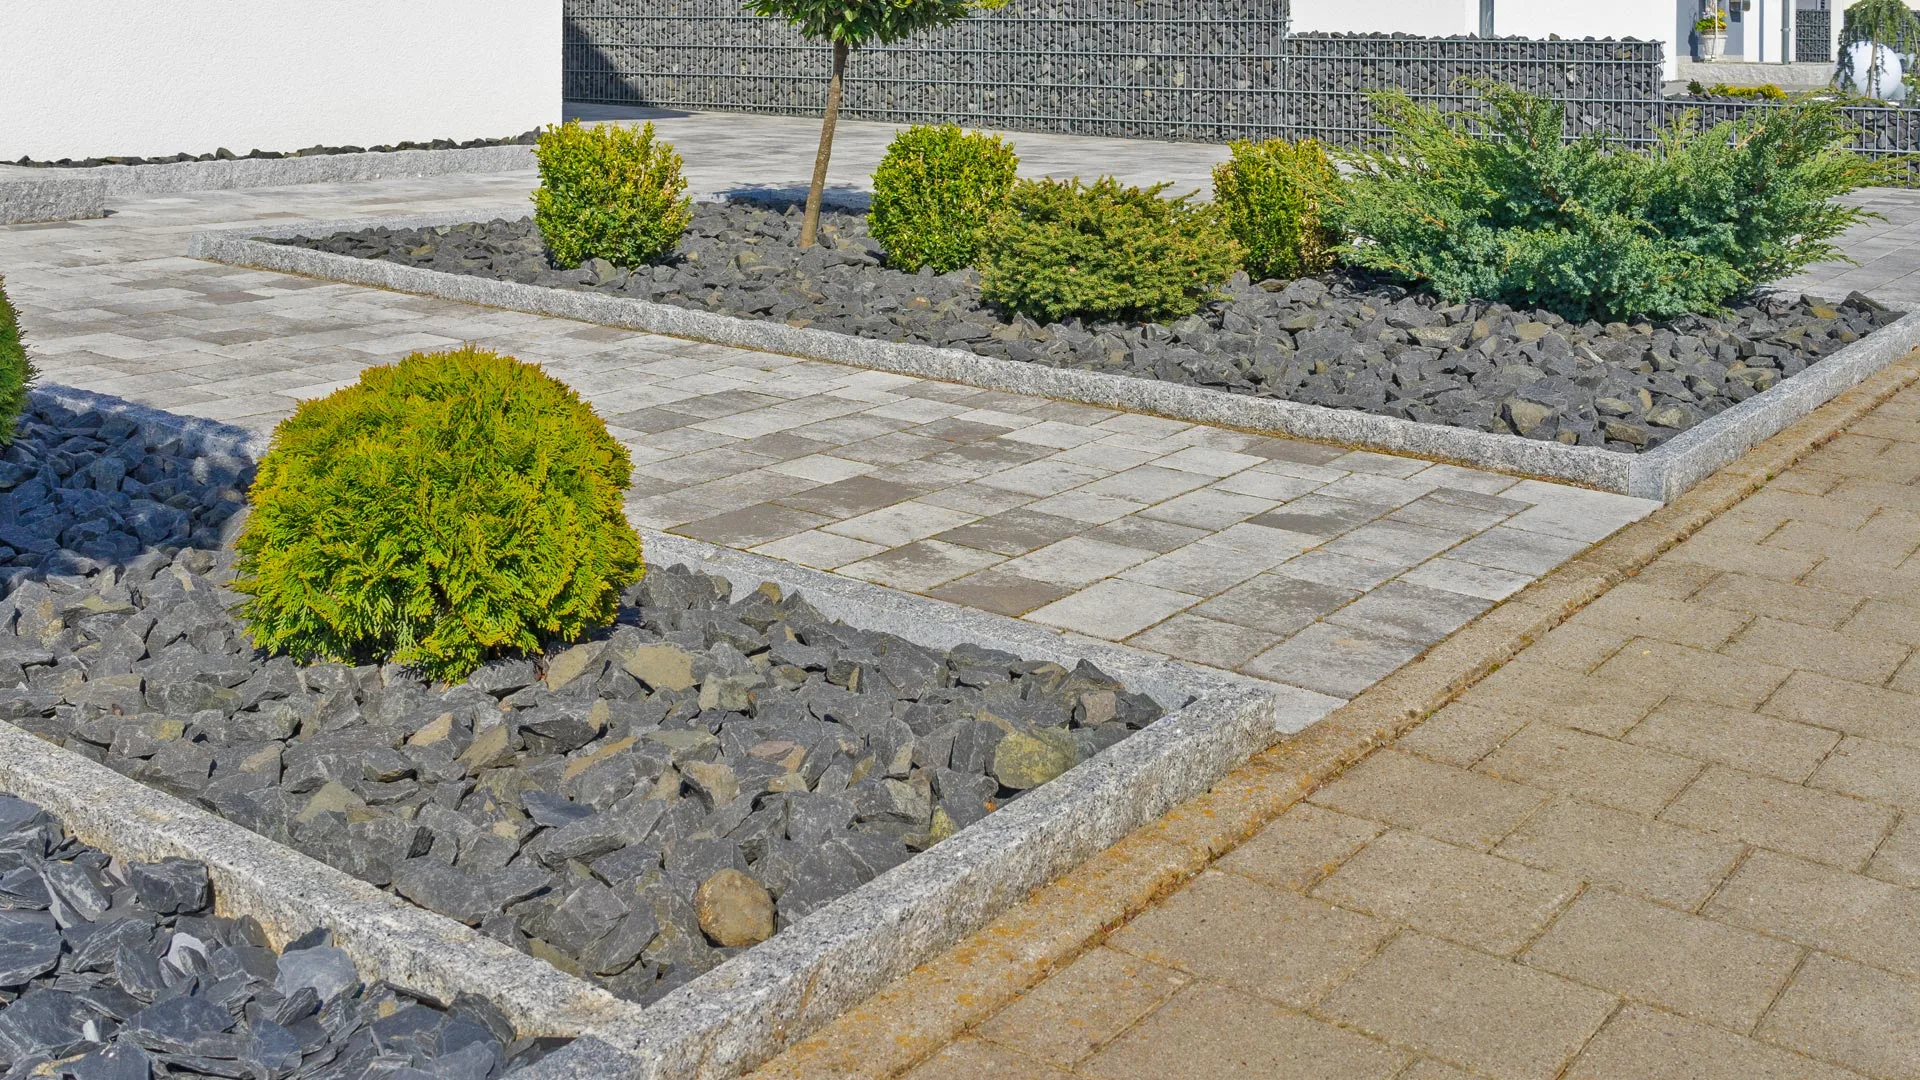 A paver side walk with decorative rock accents and small shrubs outside a commercial building in Bethlehem, %%sate%%.